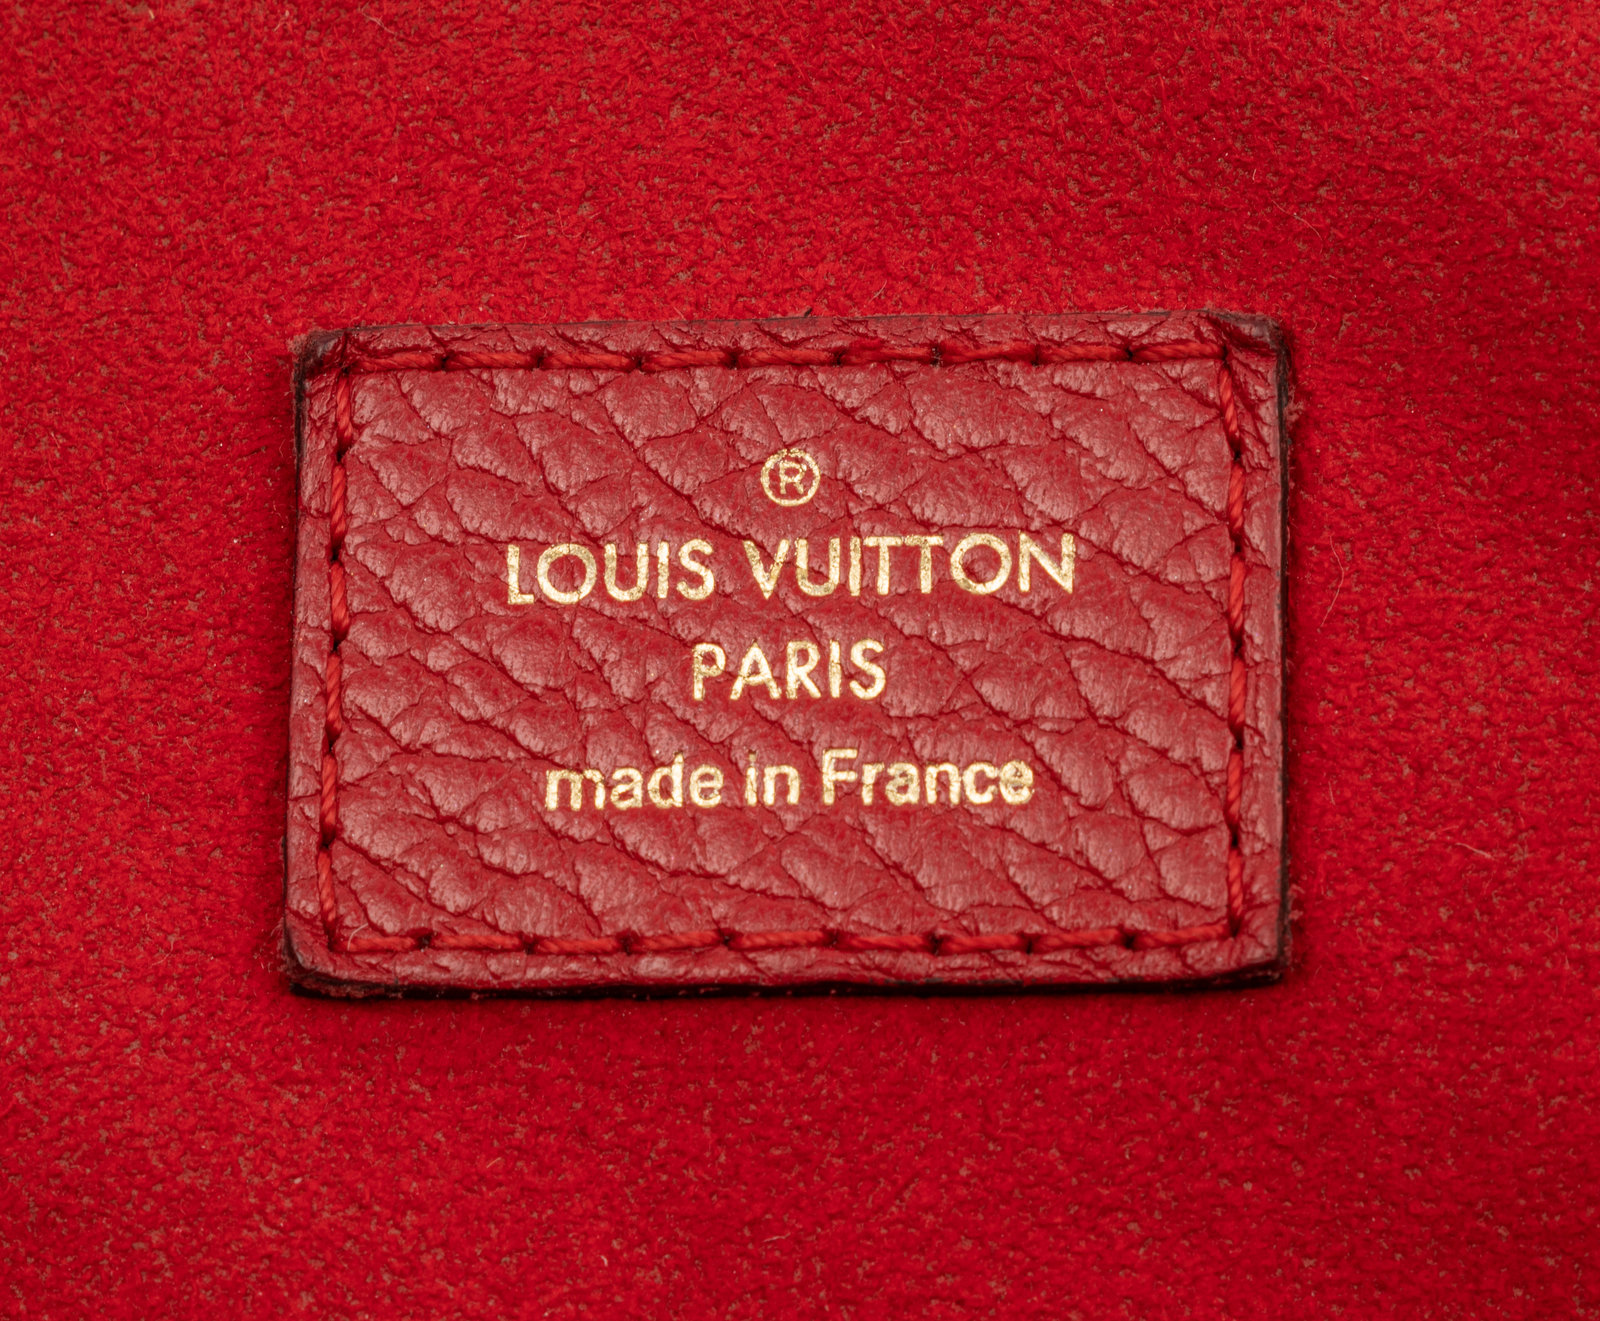 Sold at Auction: AUTHENTIC LOUIS VUITTON LEATHER LEATHER KEYCHAIN